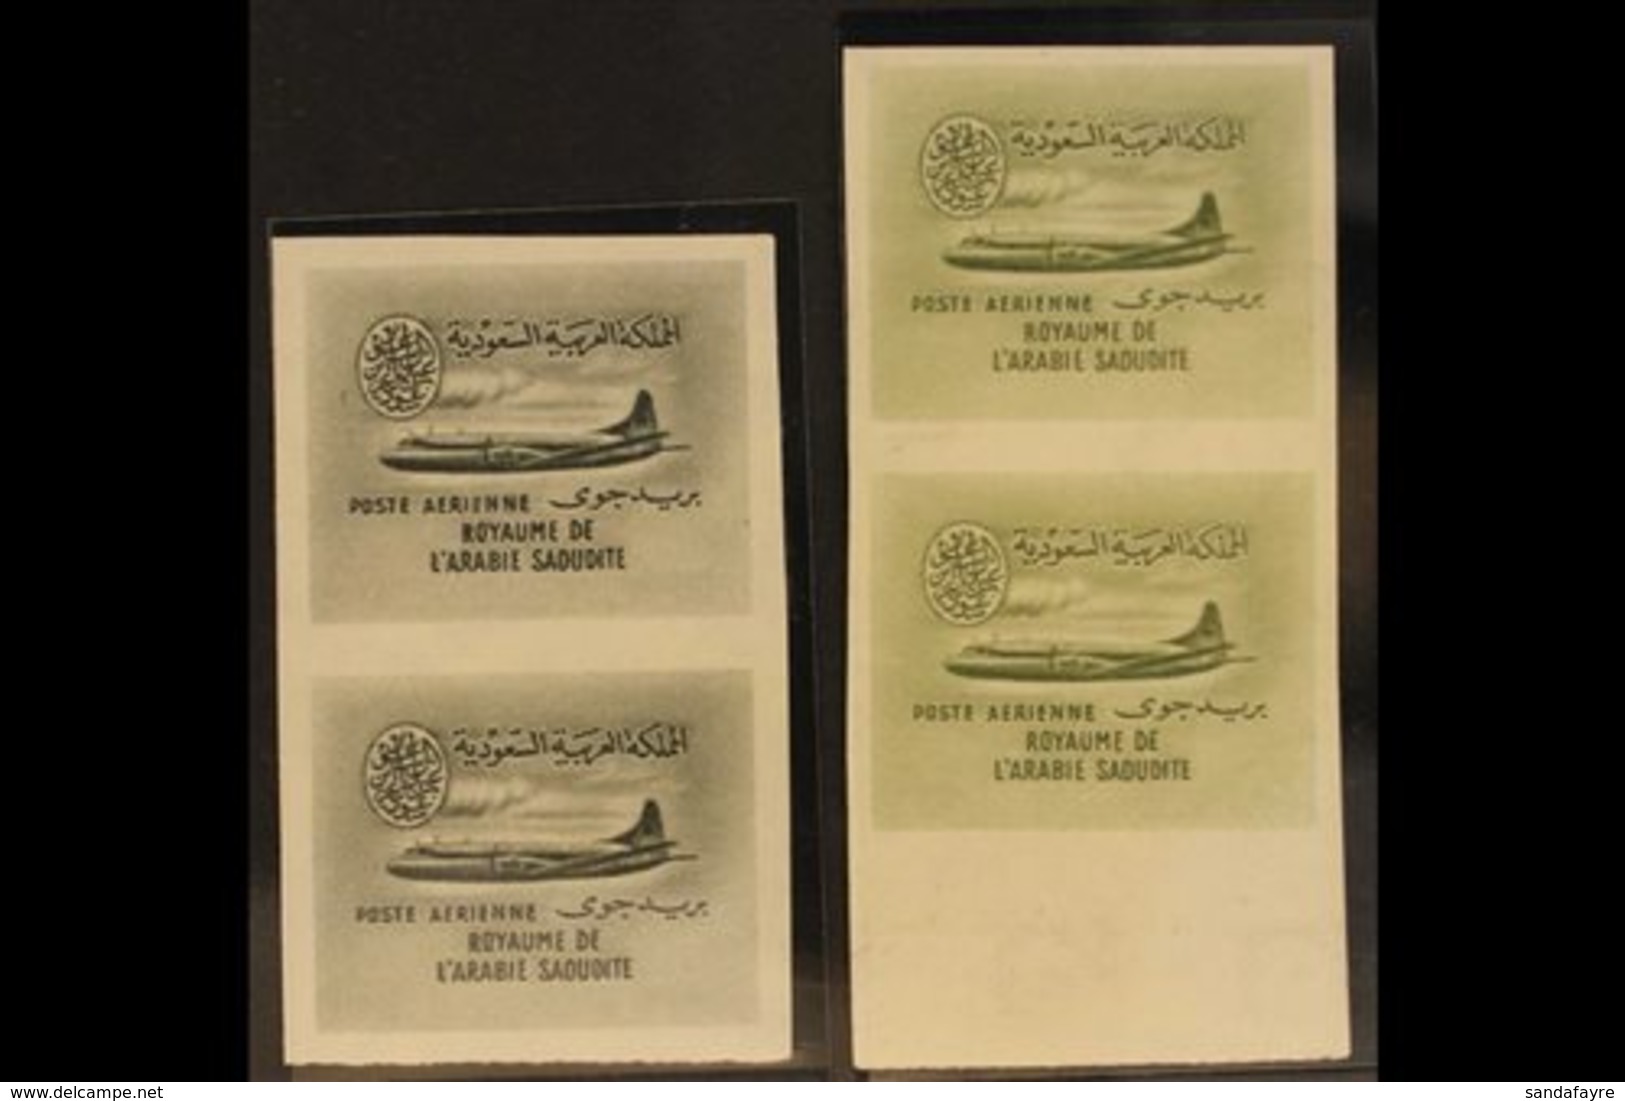 1963-5 6p And 8p Vickers Viscount Airmail Proofs In Central Colour On Gummed Wmk Paper, As SG 484/5, In Vertical Imperf  - Arabia Saudita